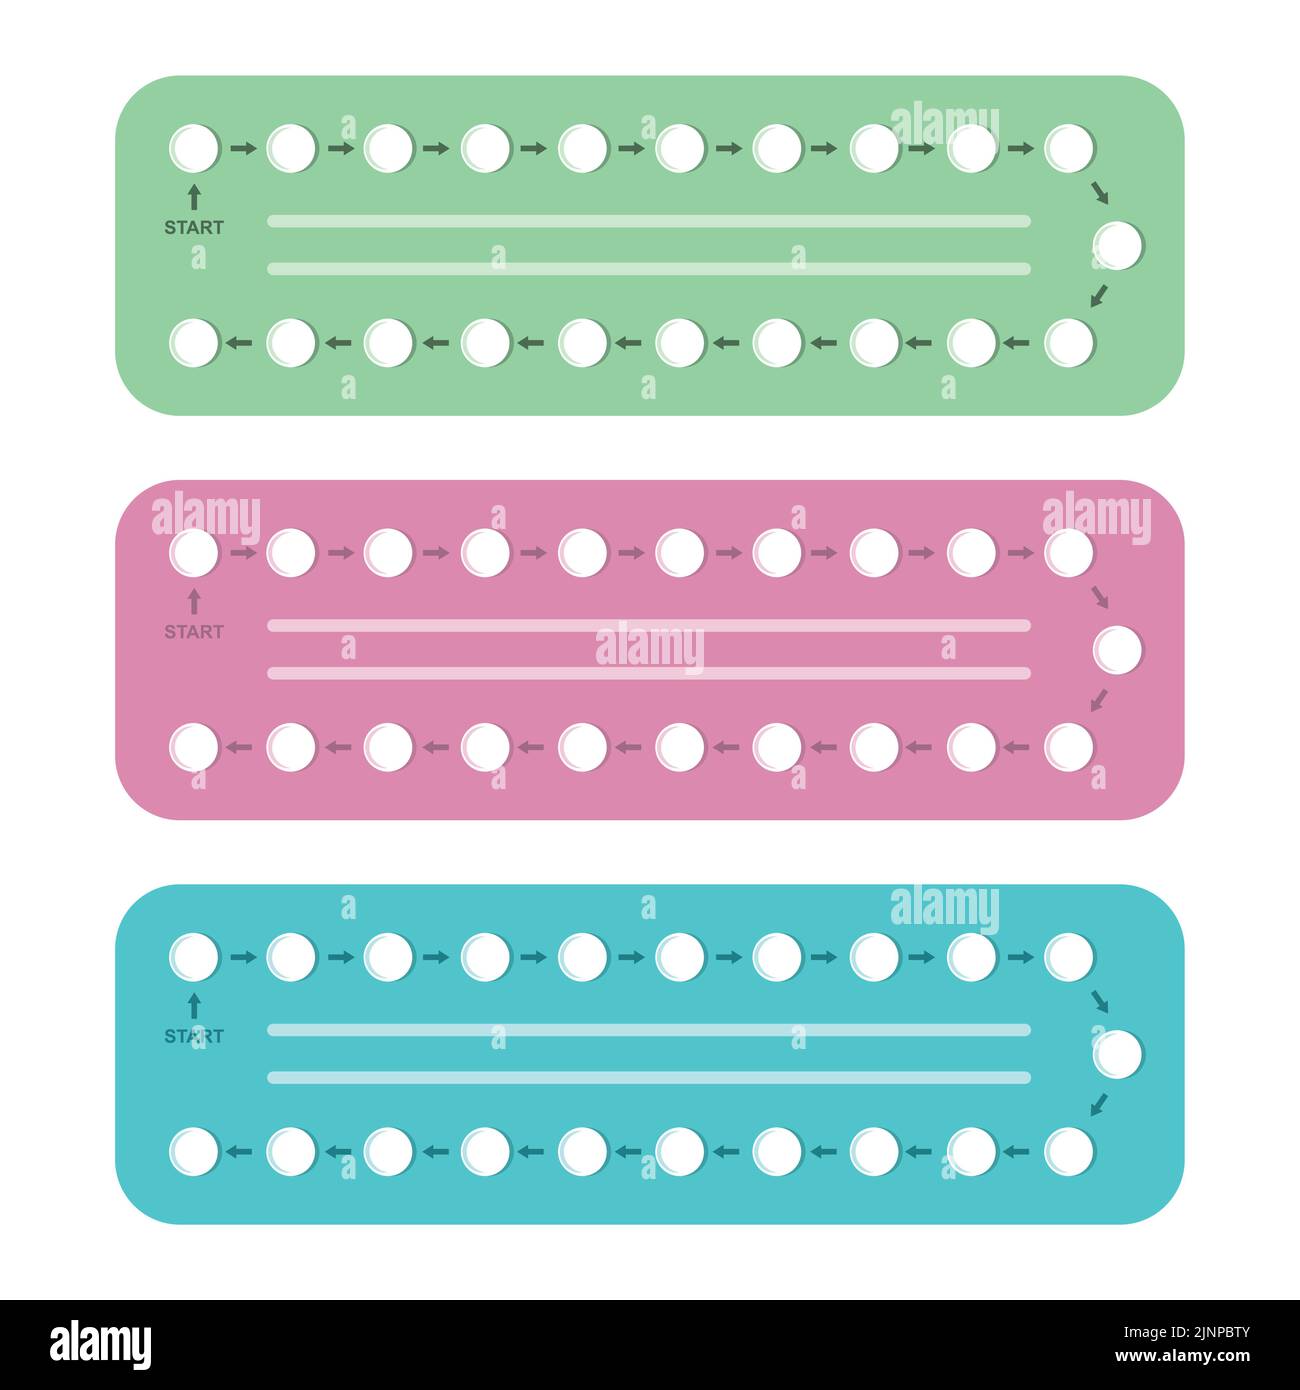 birth control pills info graphic isolated on white Stock Vector